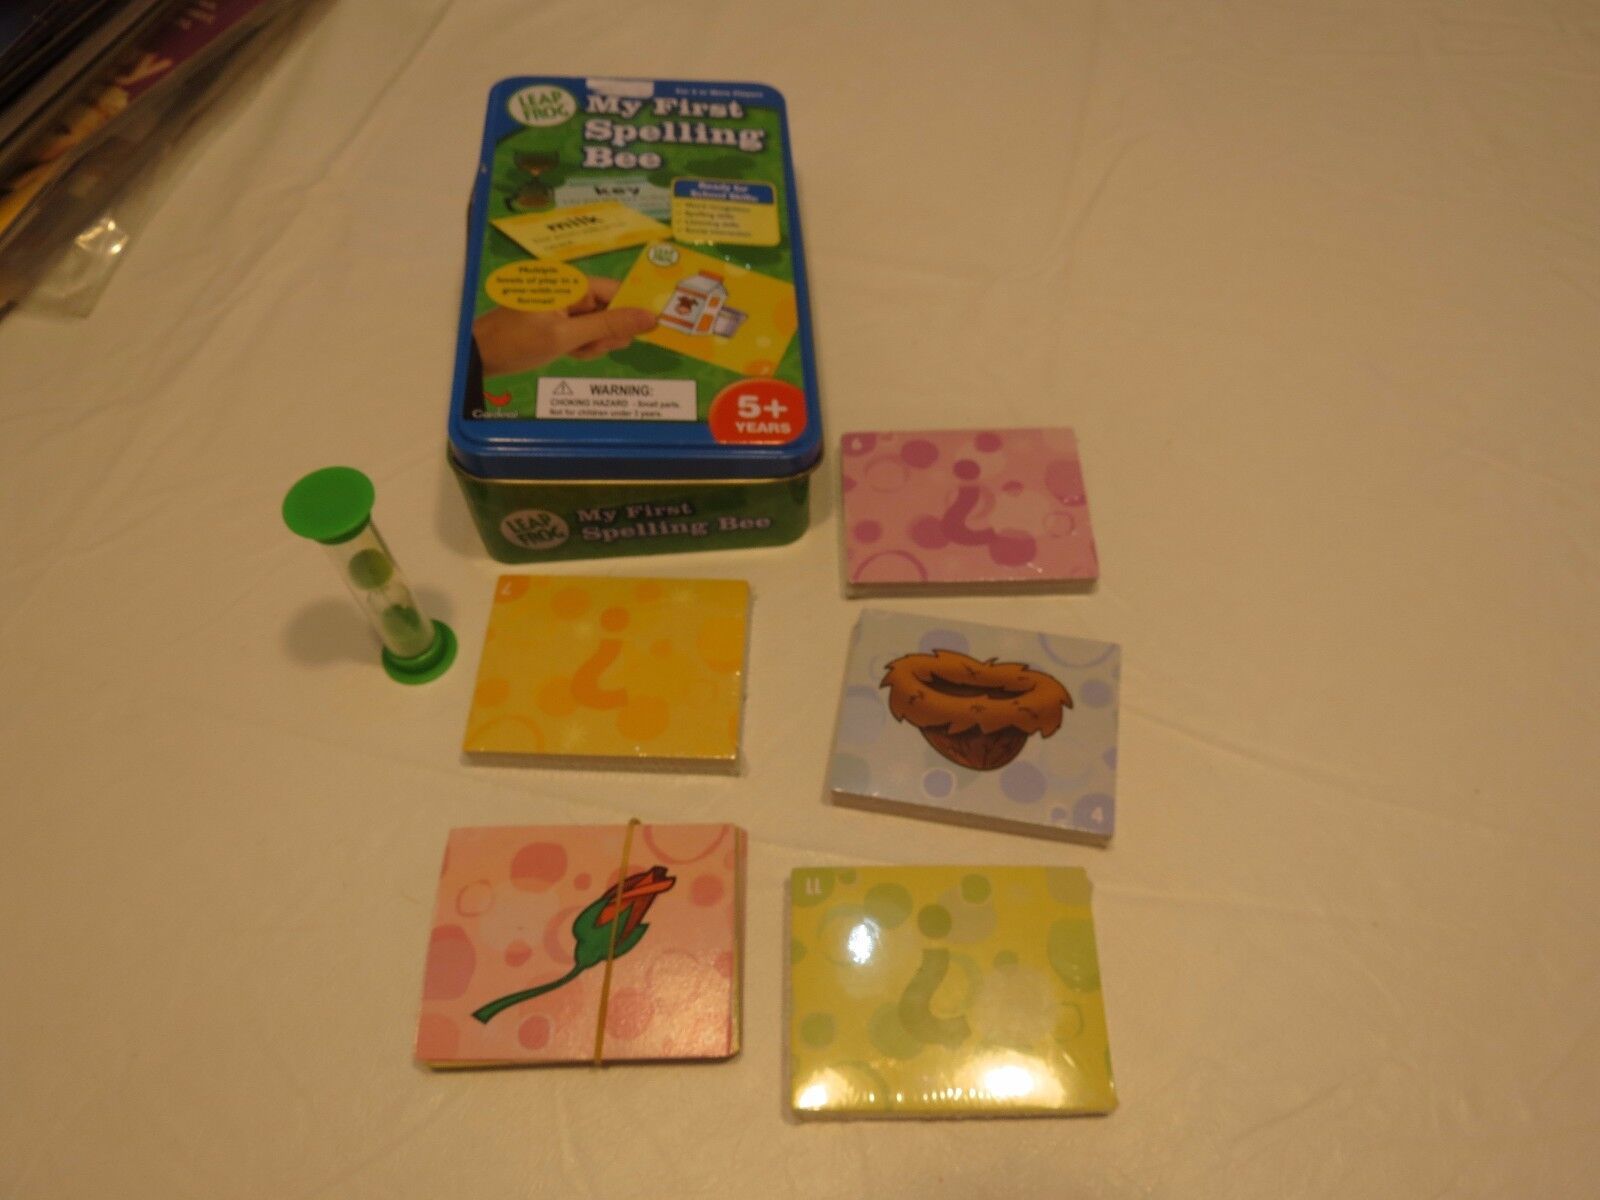 Leap frog spelling bee used pre owned My First School skills picture cards game - $10.29